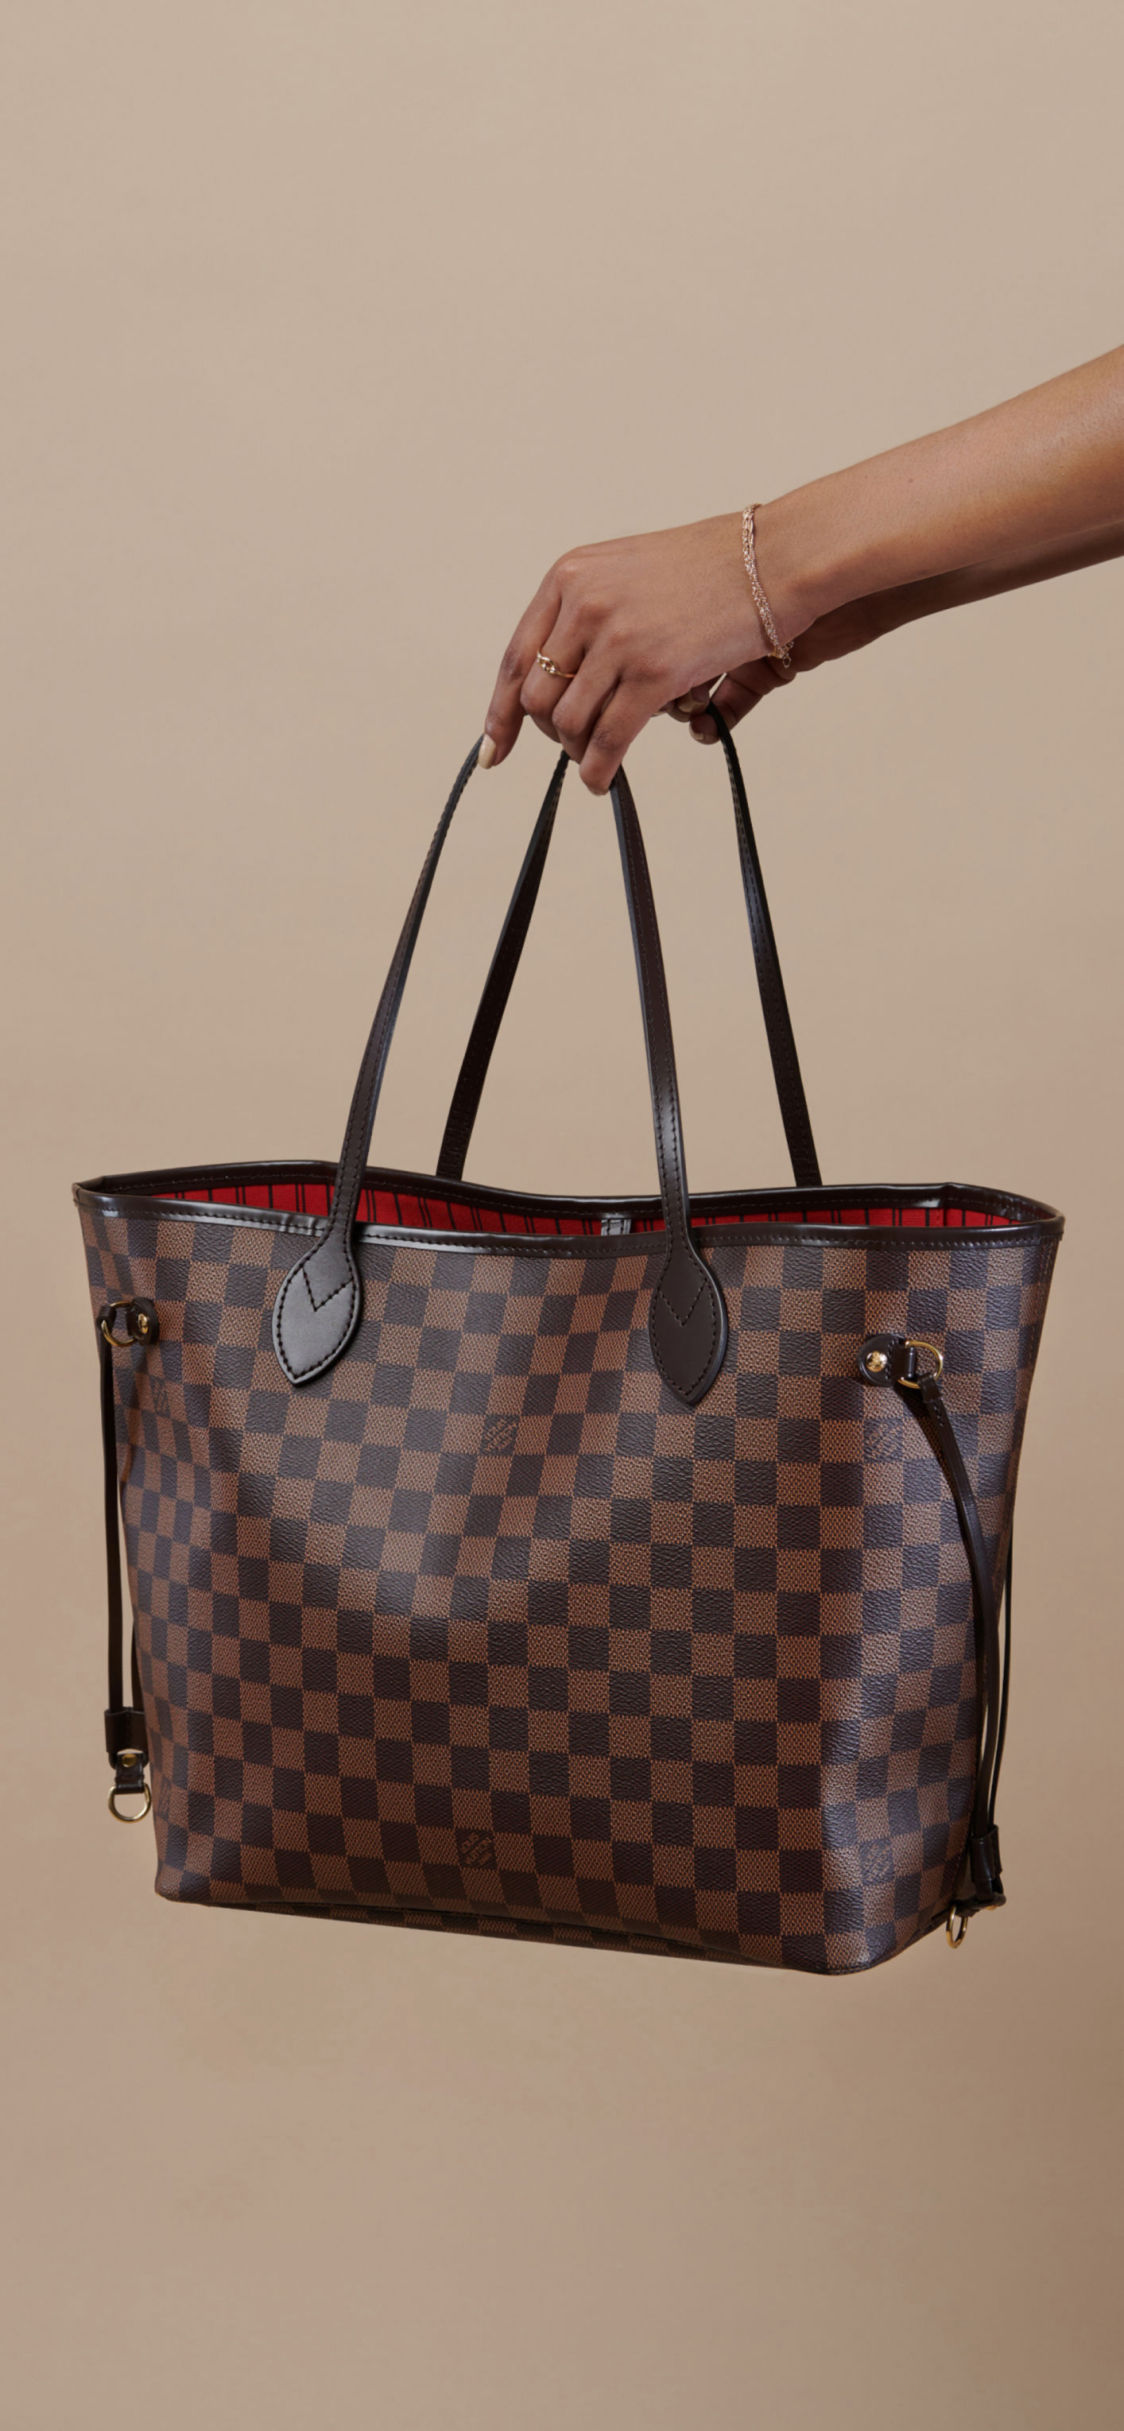 How to clean a louis vuitton leather bag